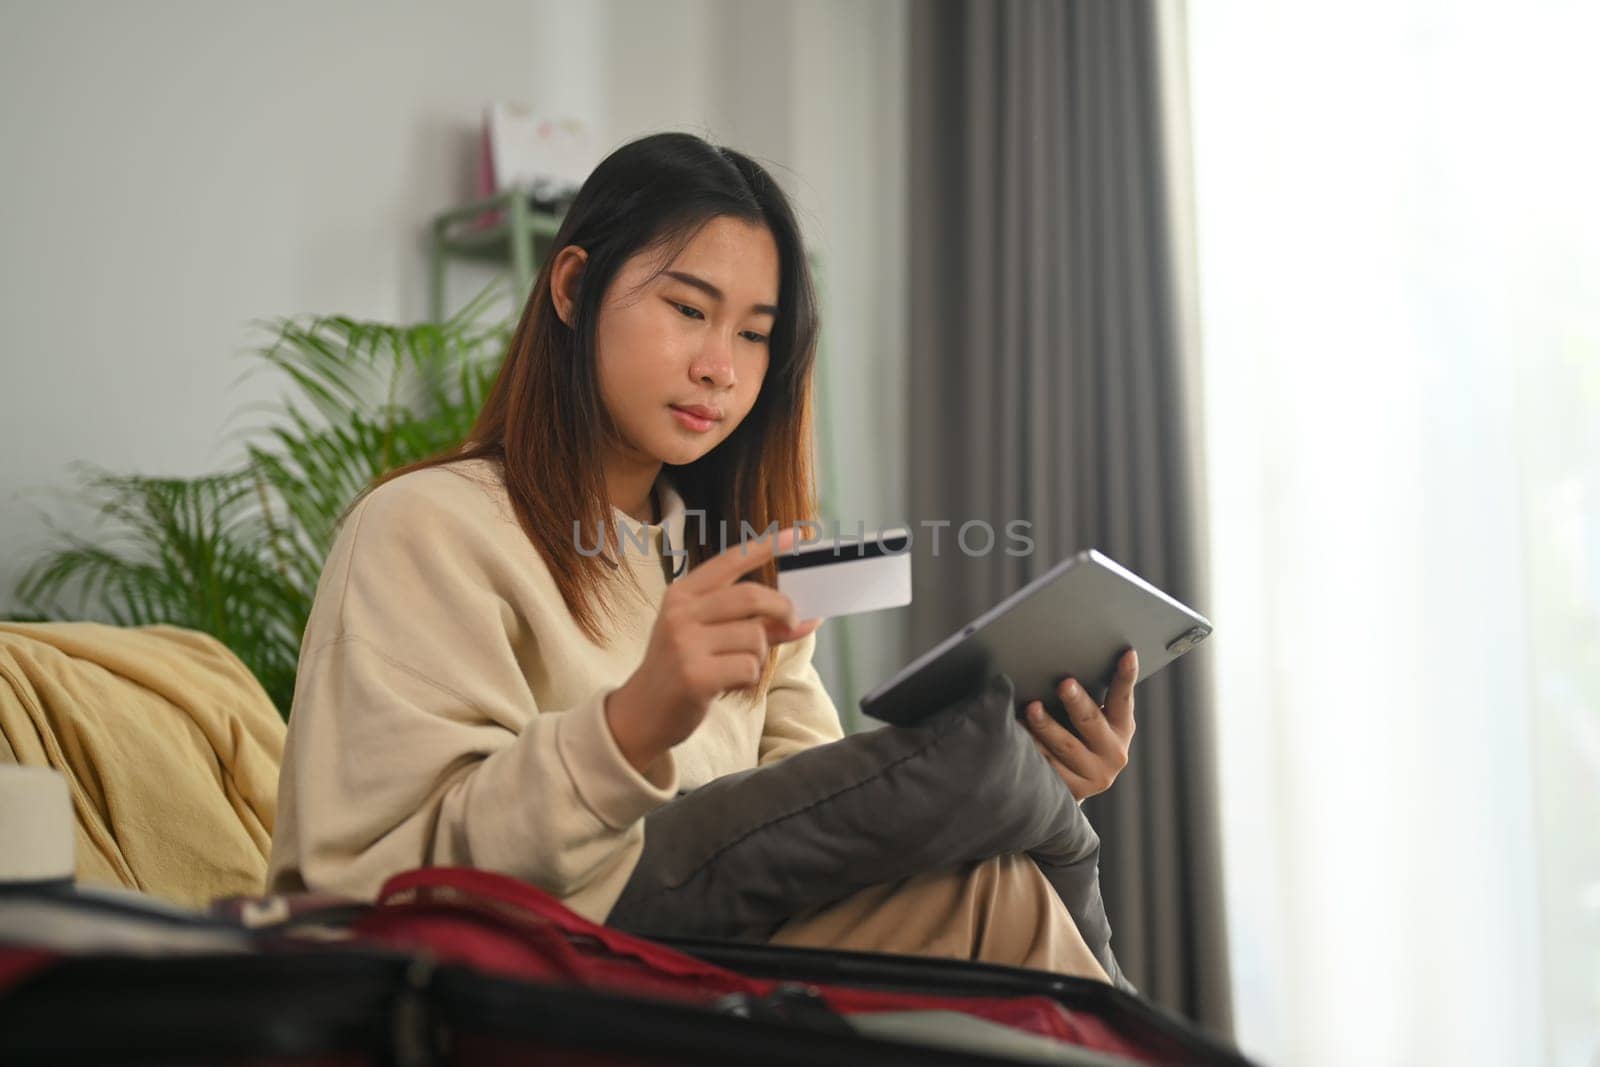 Young woman holding credit card and using digital tablet while transferring money or booking hotel room.